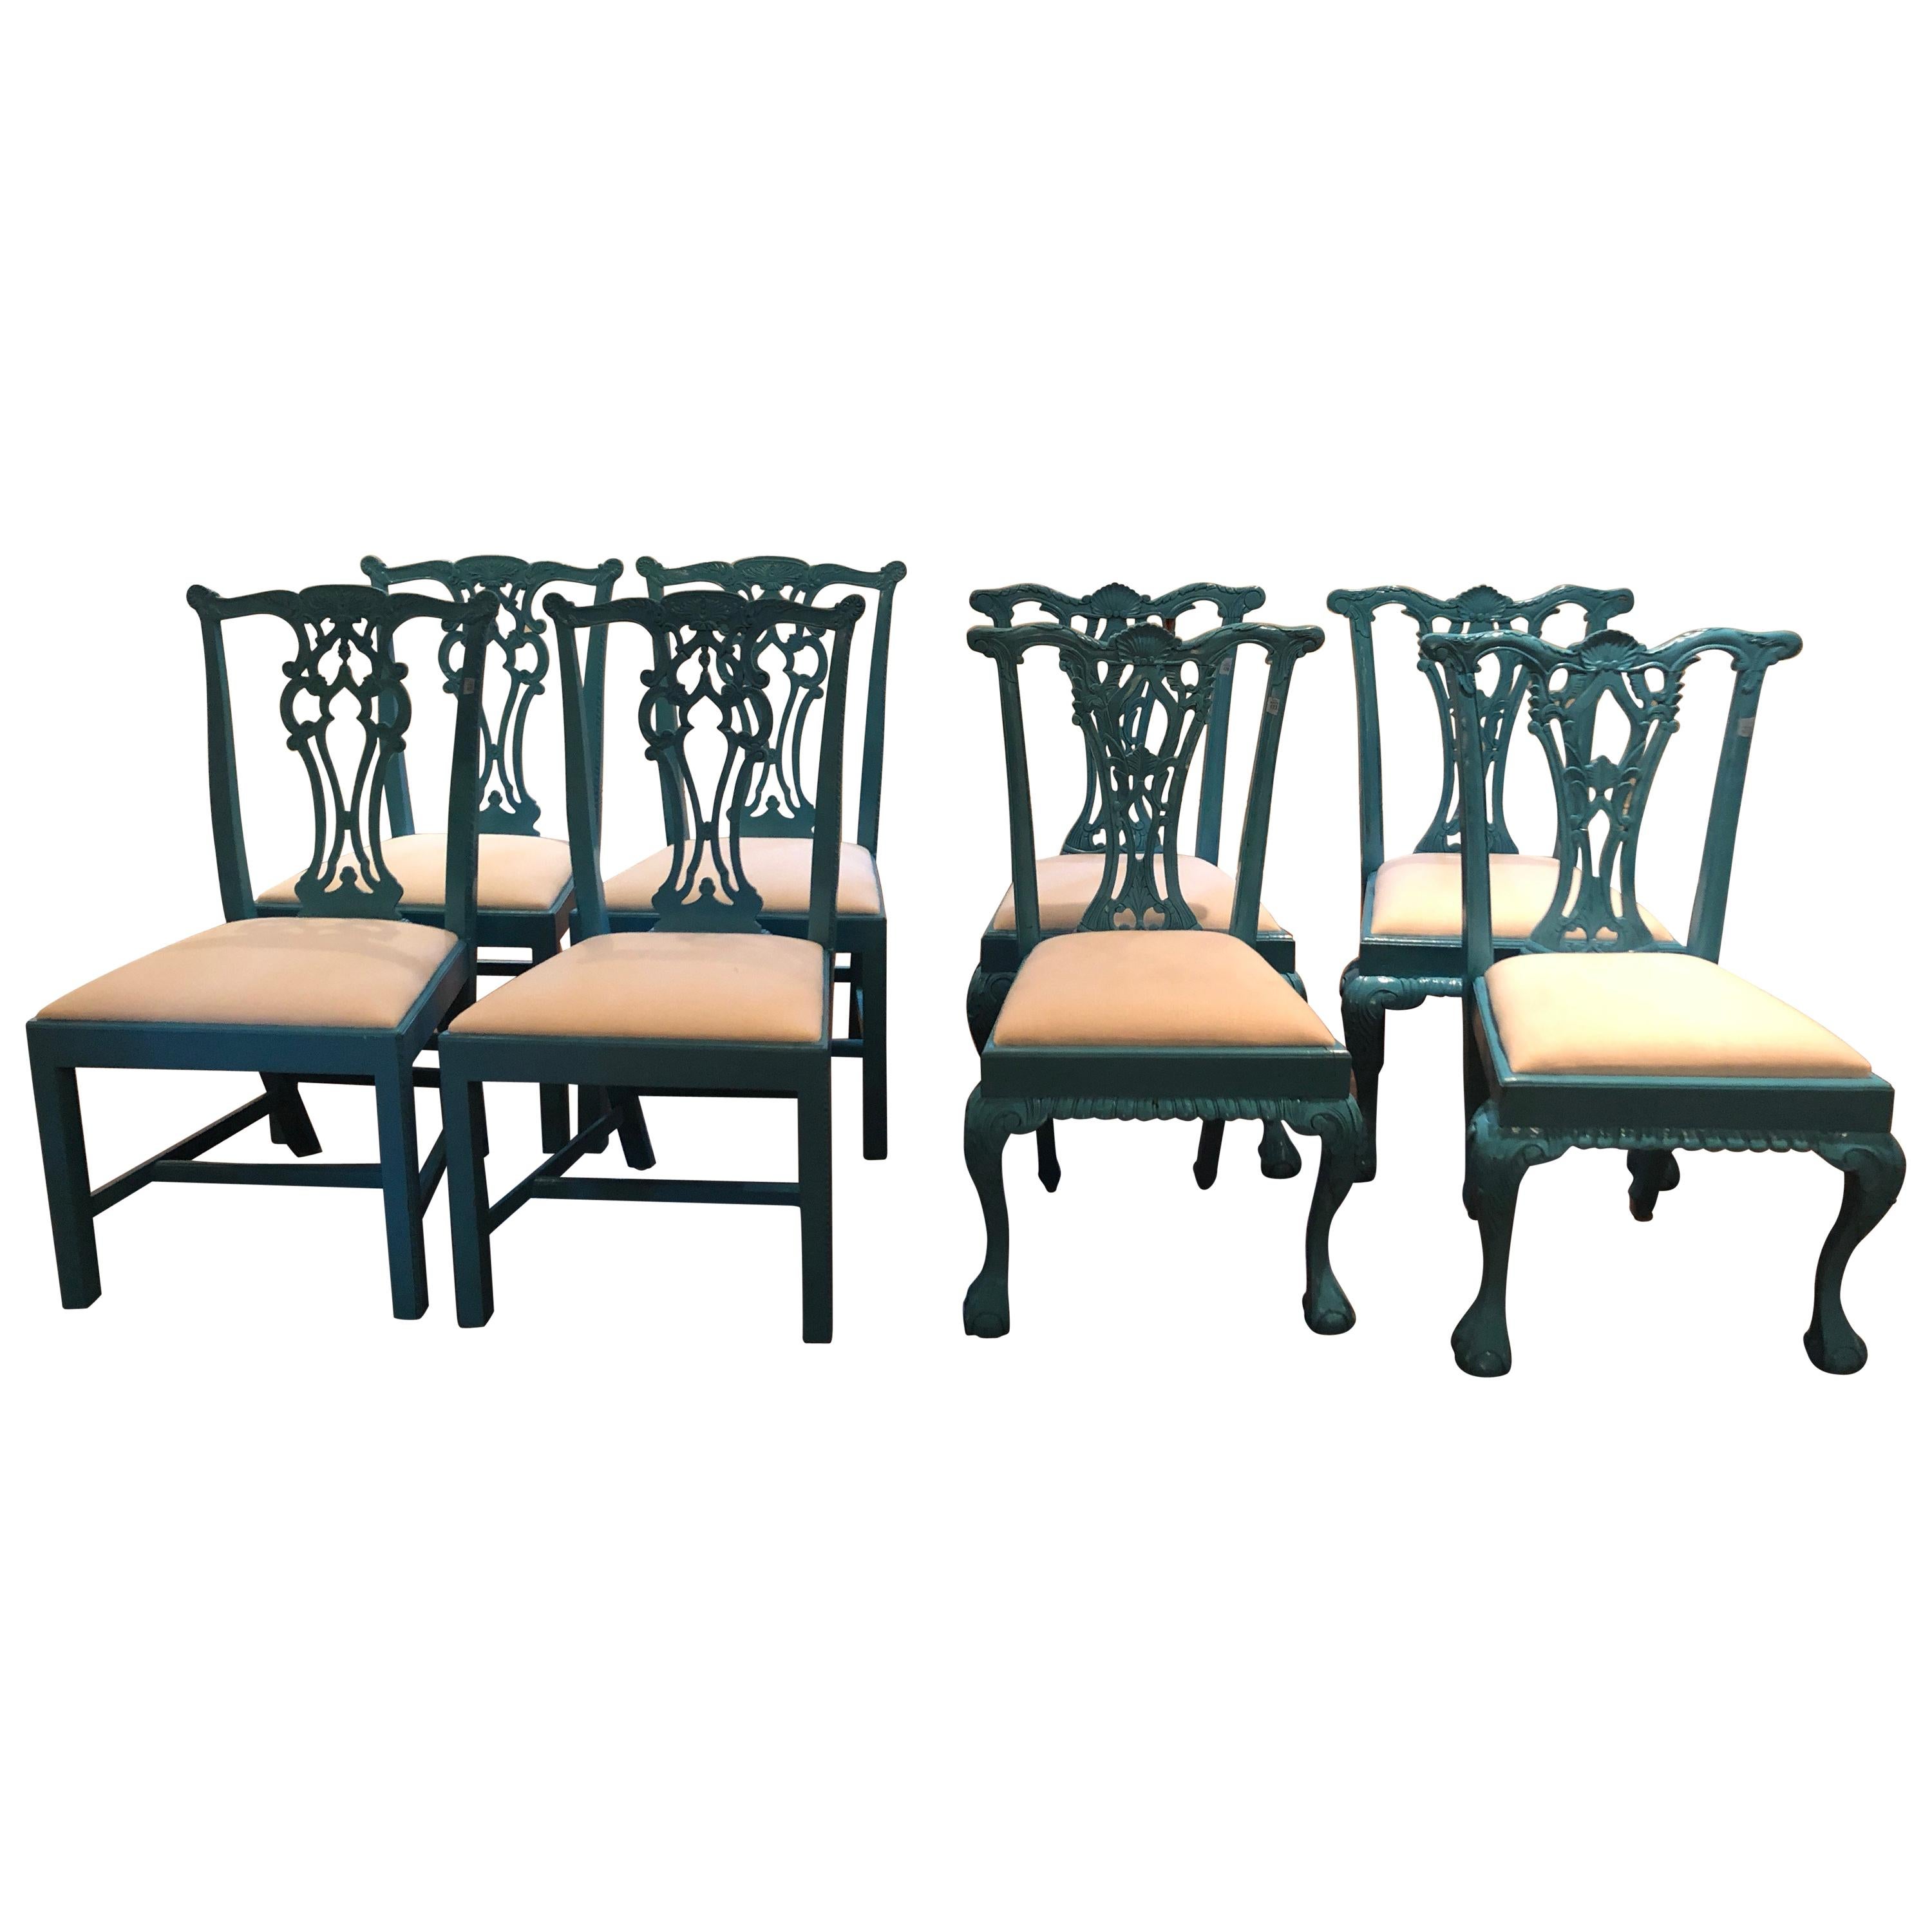 Glamorous Set of 8 Lacquered Carved Wood Dining Chairs